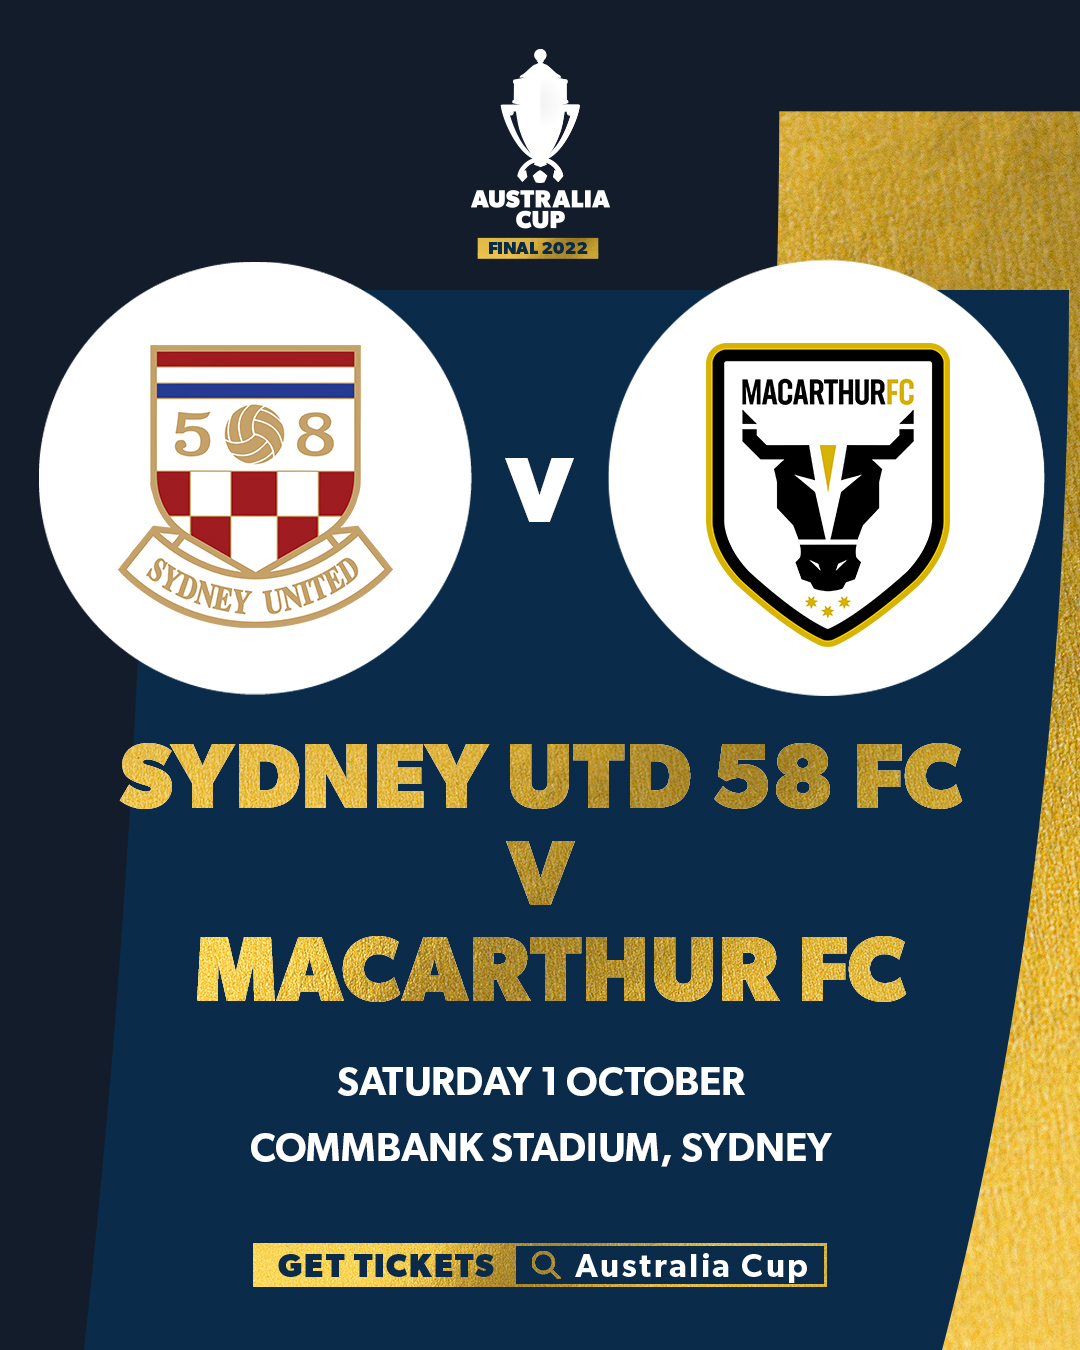 Road to the Australia Cup Final 2022: Macarthur FC